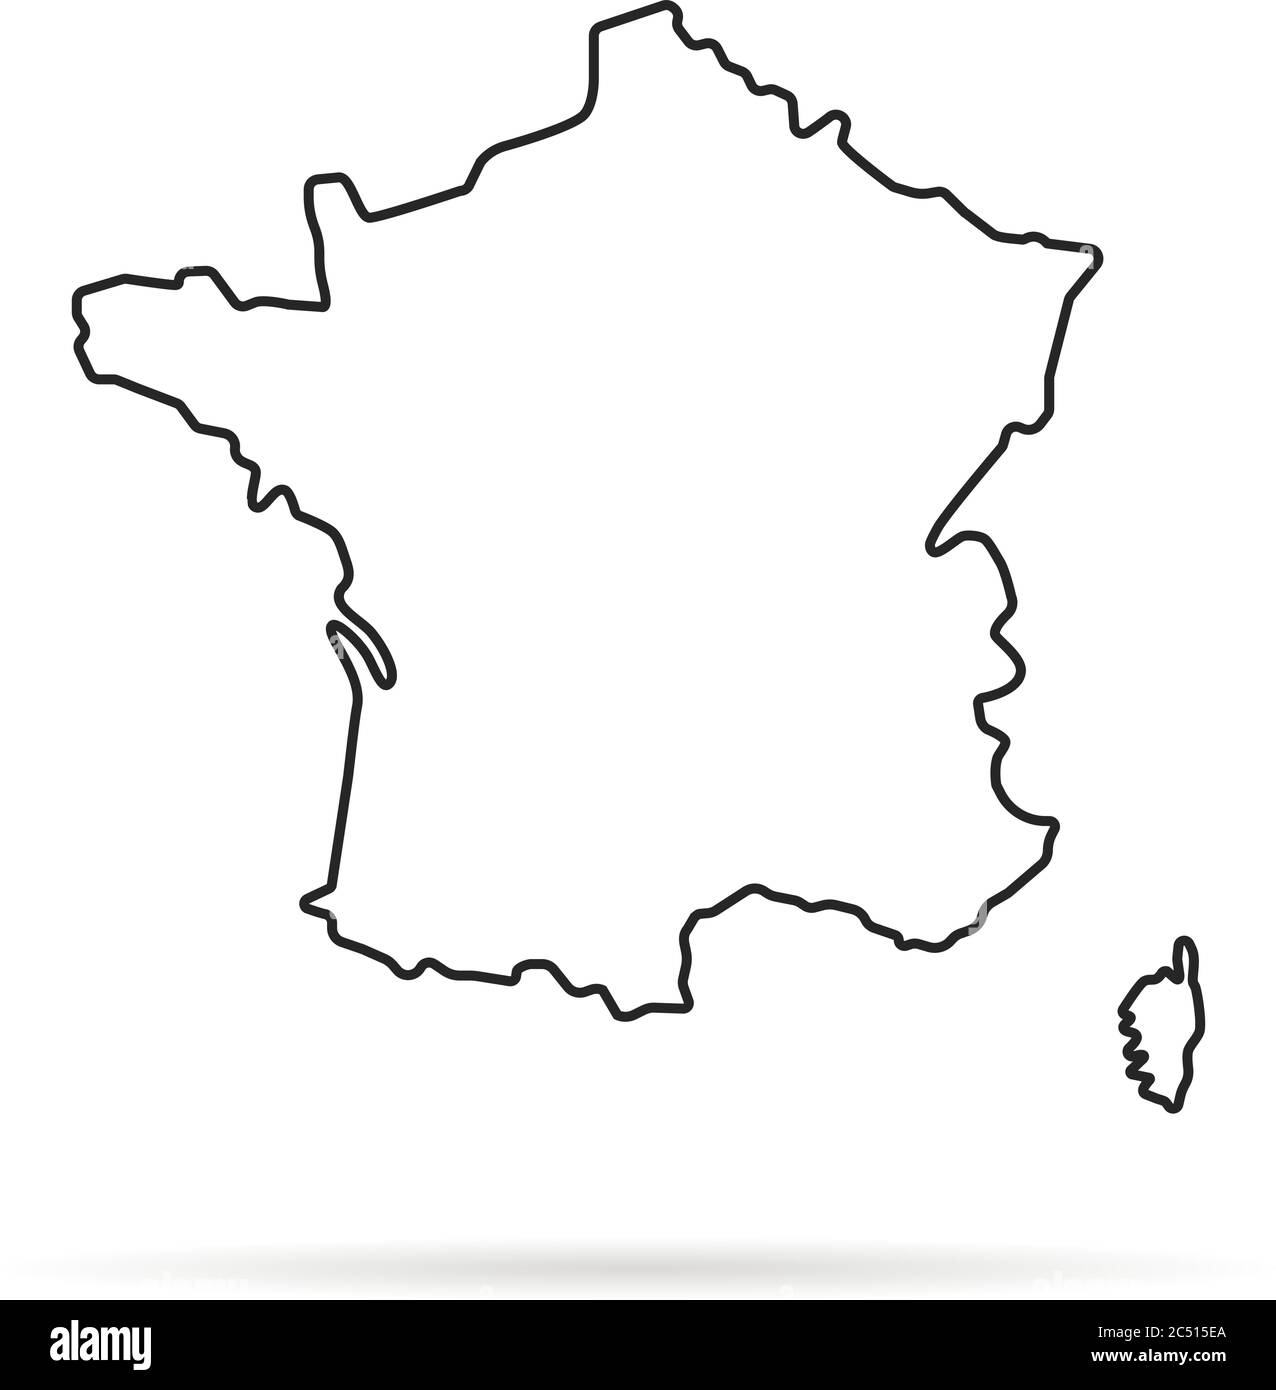 black outline hand drawn map of france Stock Vector